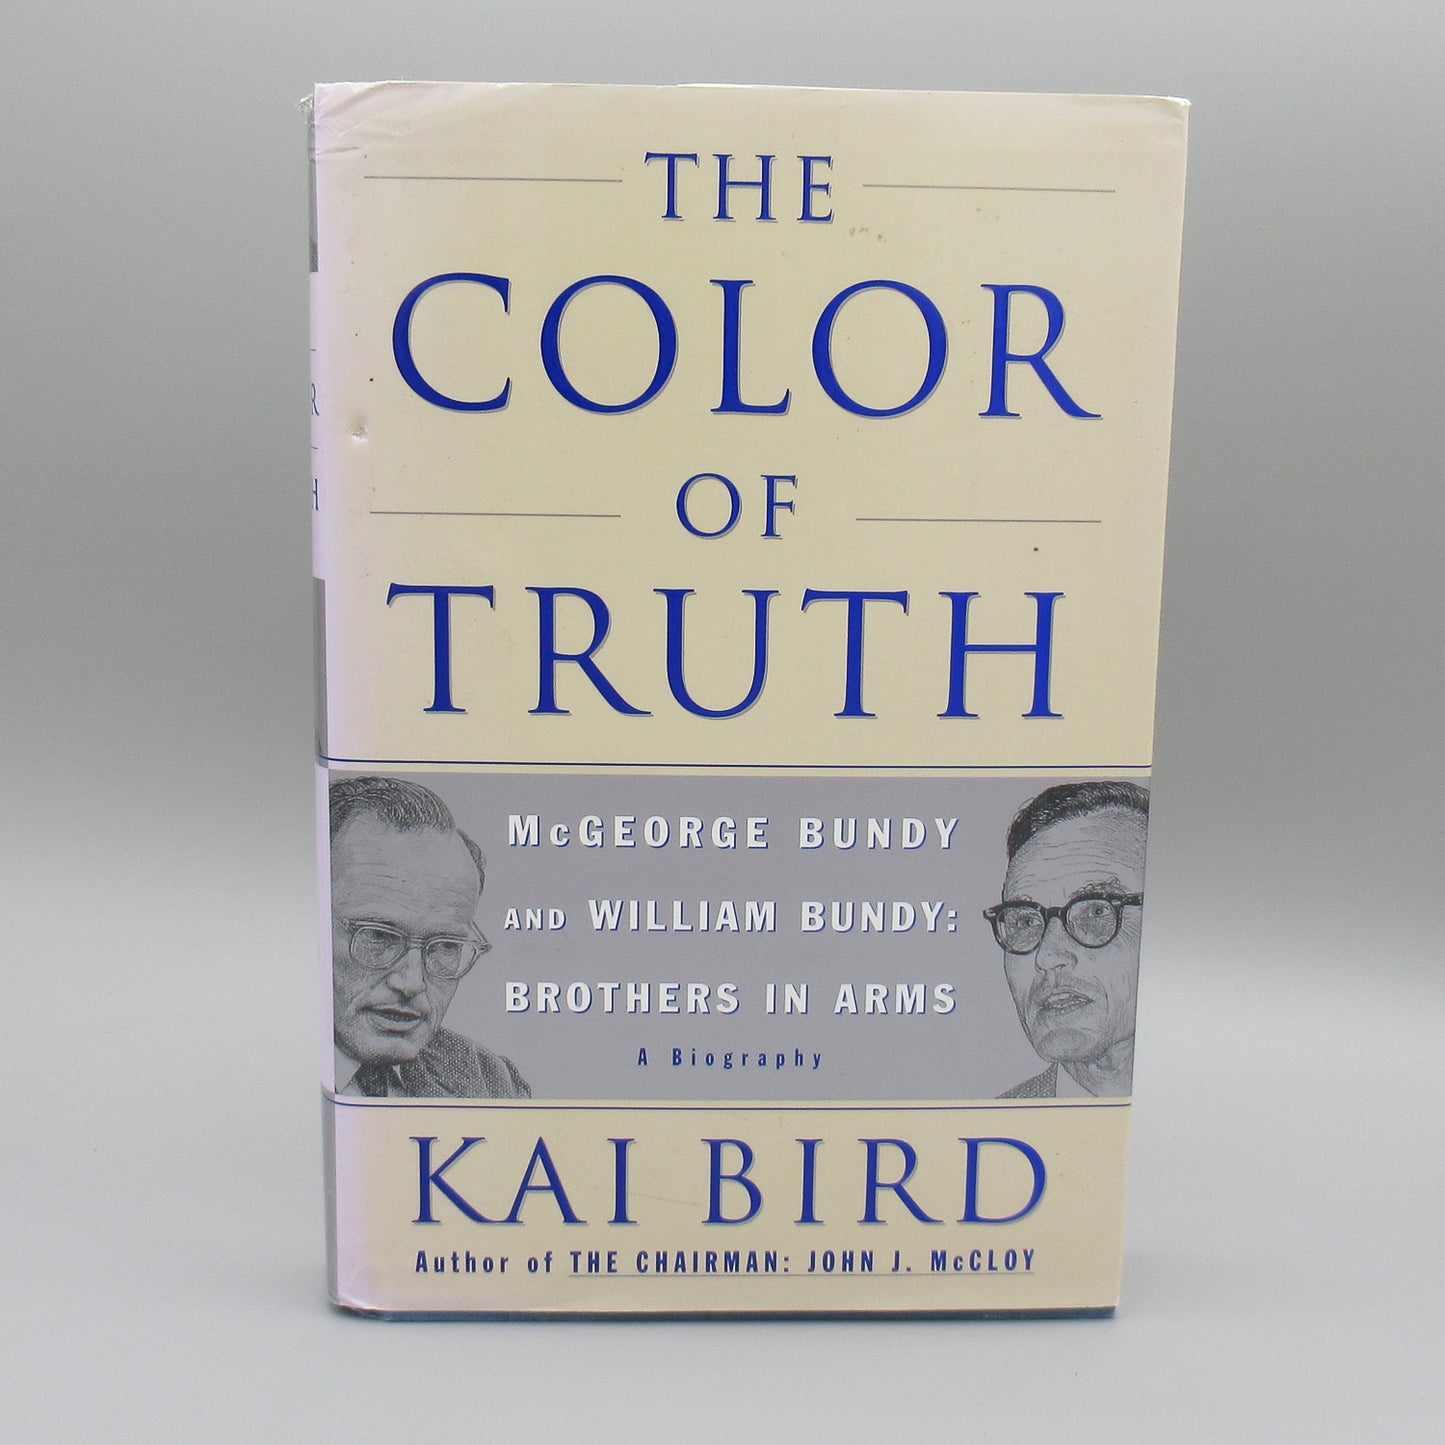 The Color of Truth: McGeorge Bundy and William Bundy: Brothers in Arms